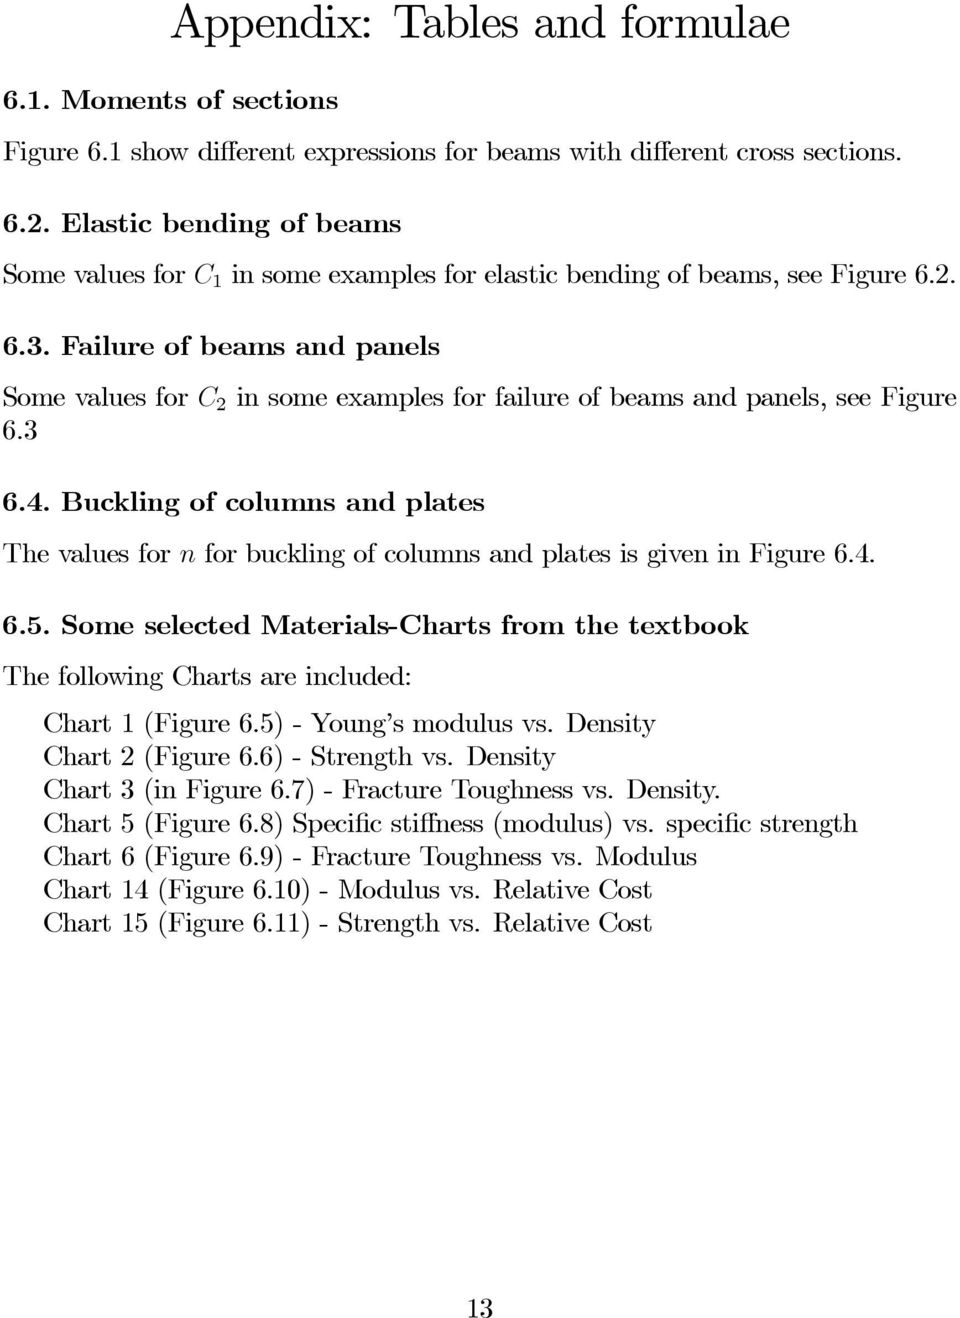 Buckling of columns and plates Thevaluesforn for buckling of columns and plates is given in Figure 6.4. 6.5.